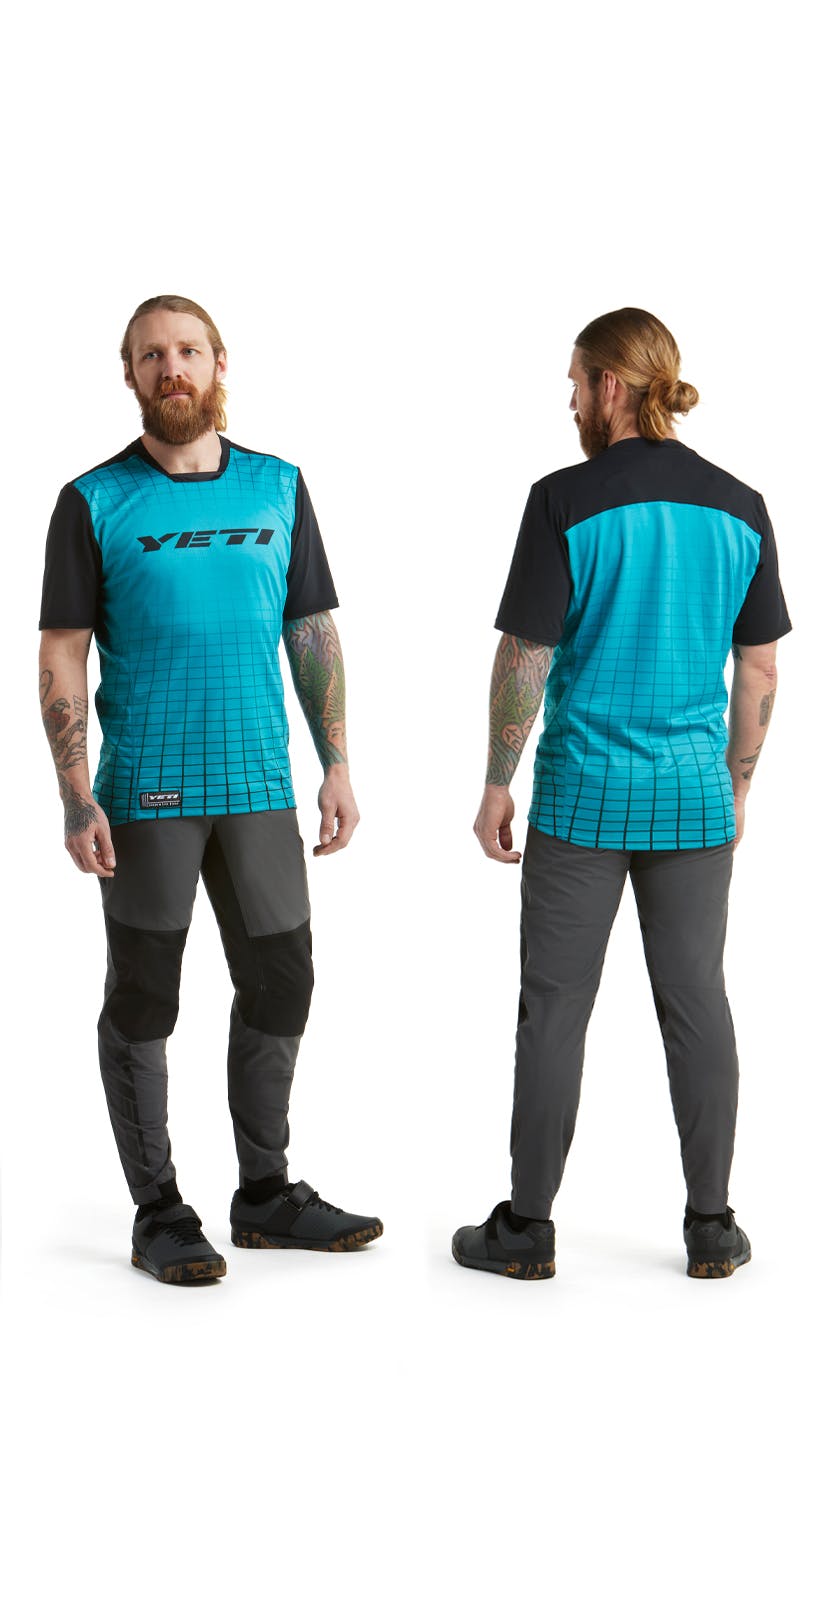 Enduro SS Jersey and Renegade Ride Pant on body